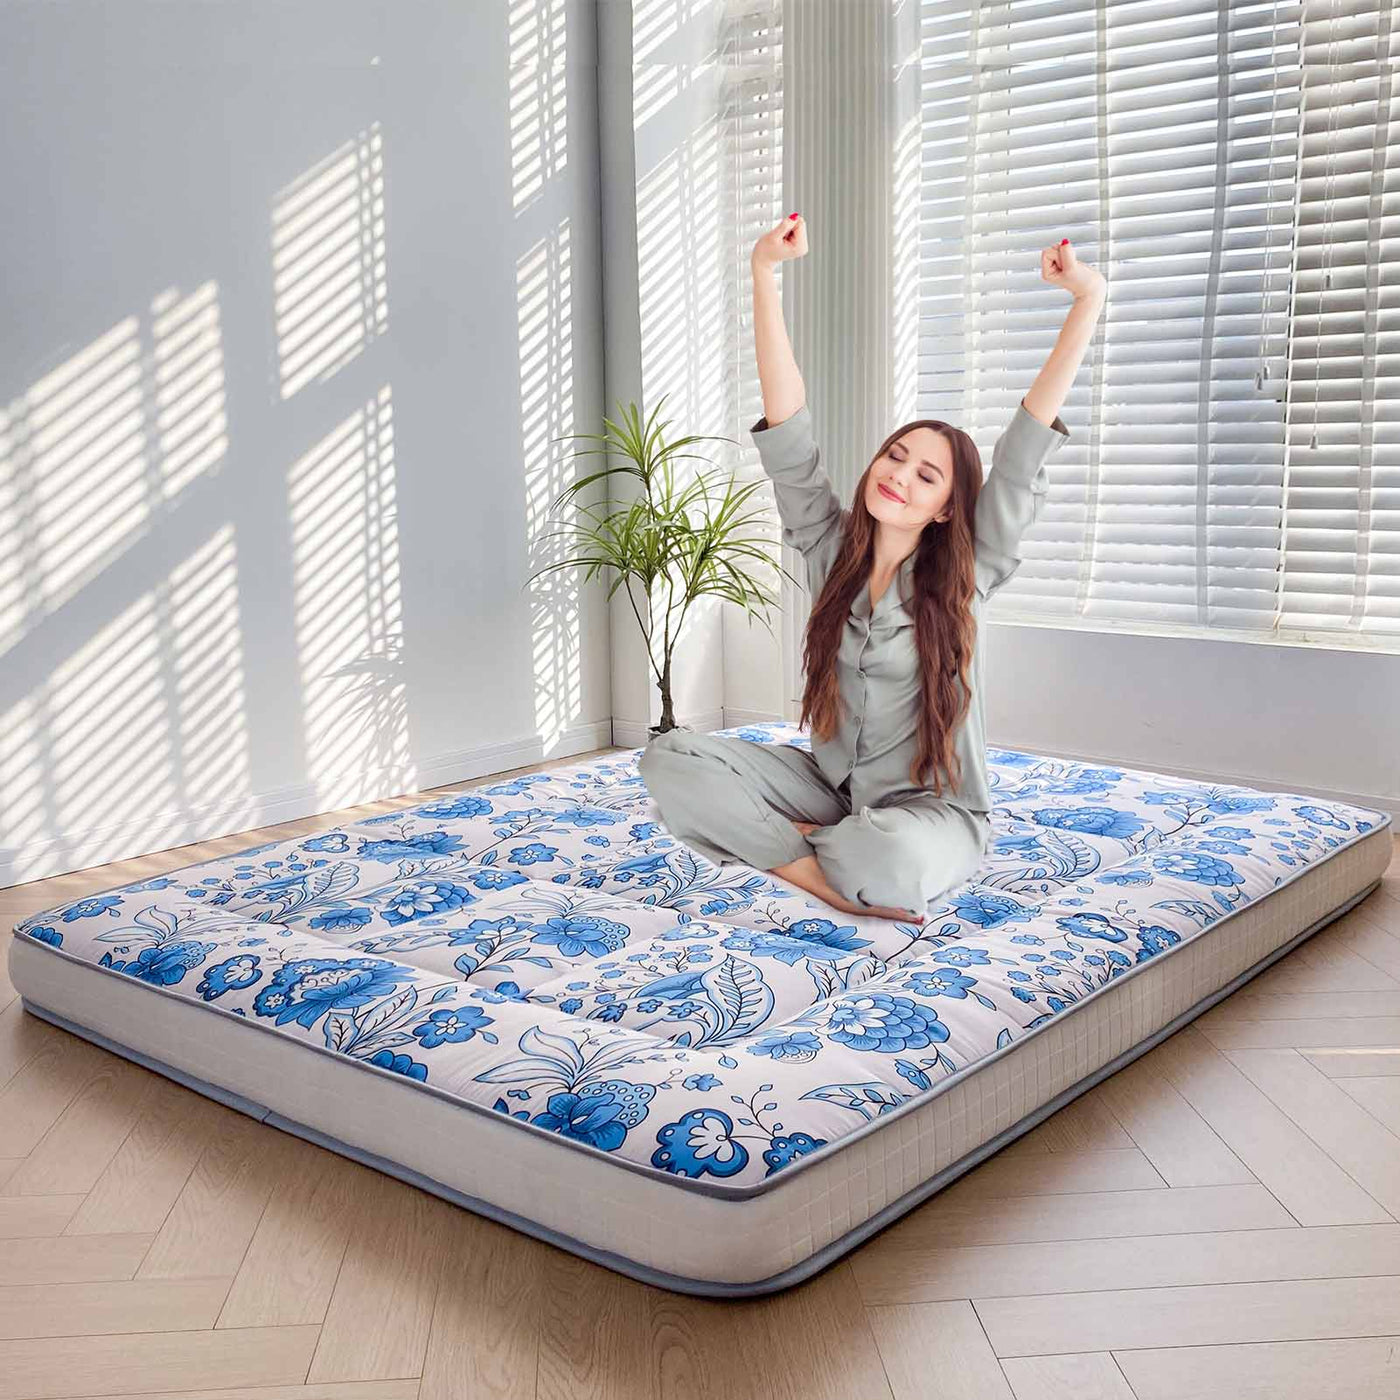 MAXYOYO 6" Extra Thick Japanese Futon Bed, Little Fresh Blue Flower Pattern Floor Mattress for Home